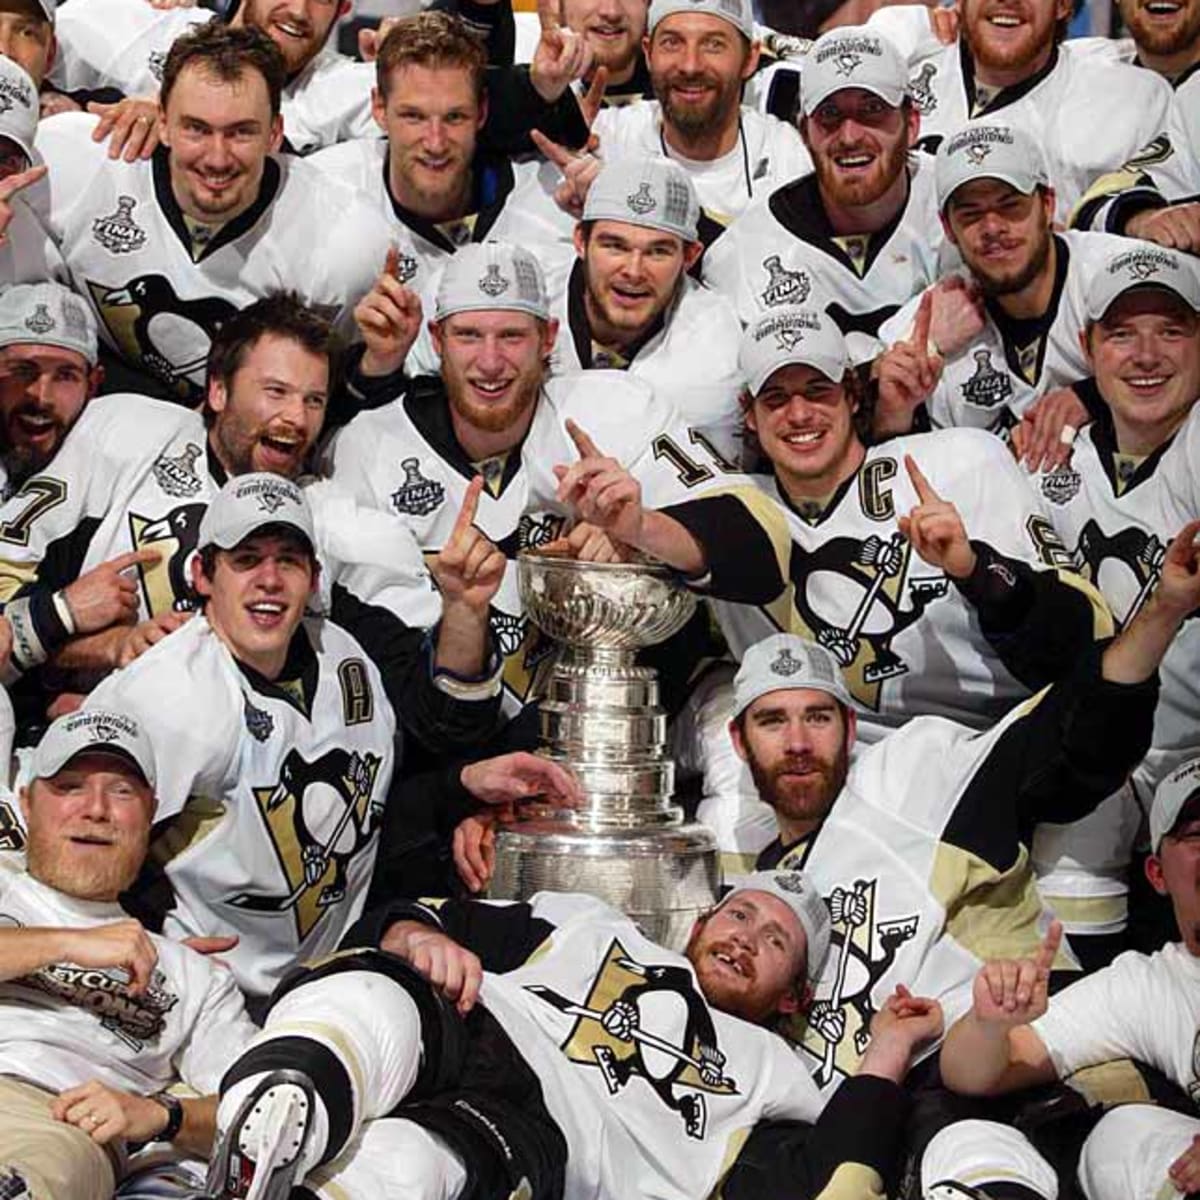 Pittsburgh Penguins' Petr Sykora skates with the Stanley Cup after